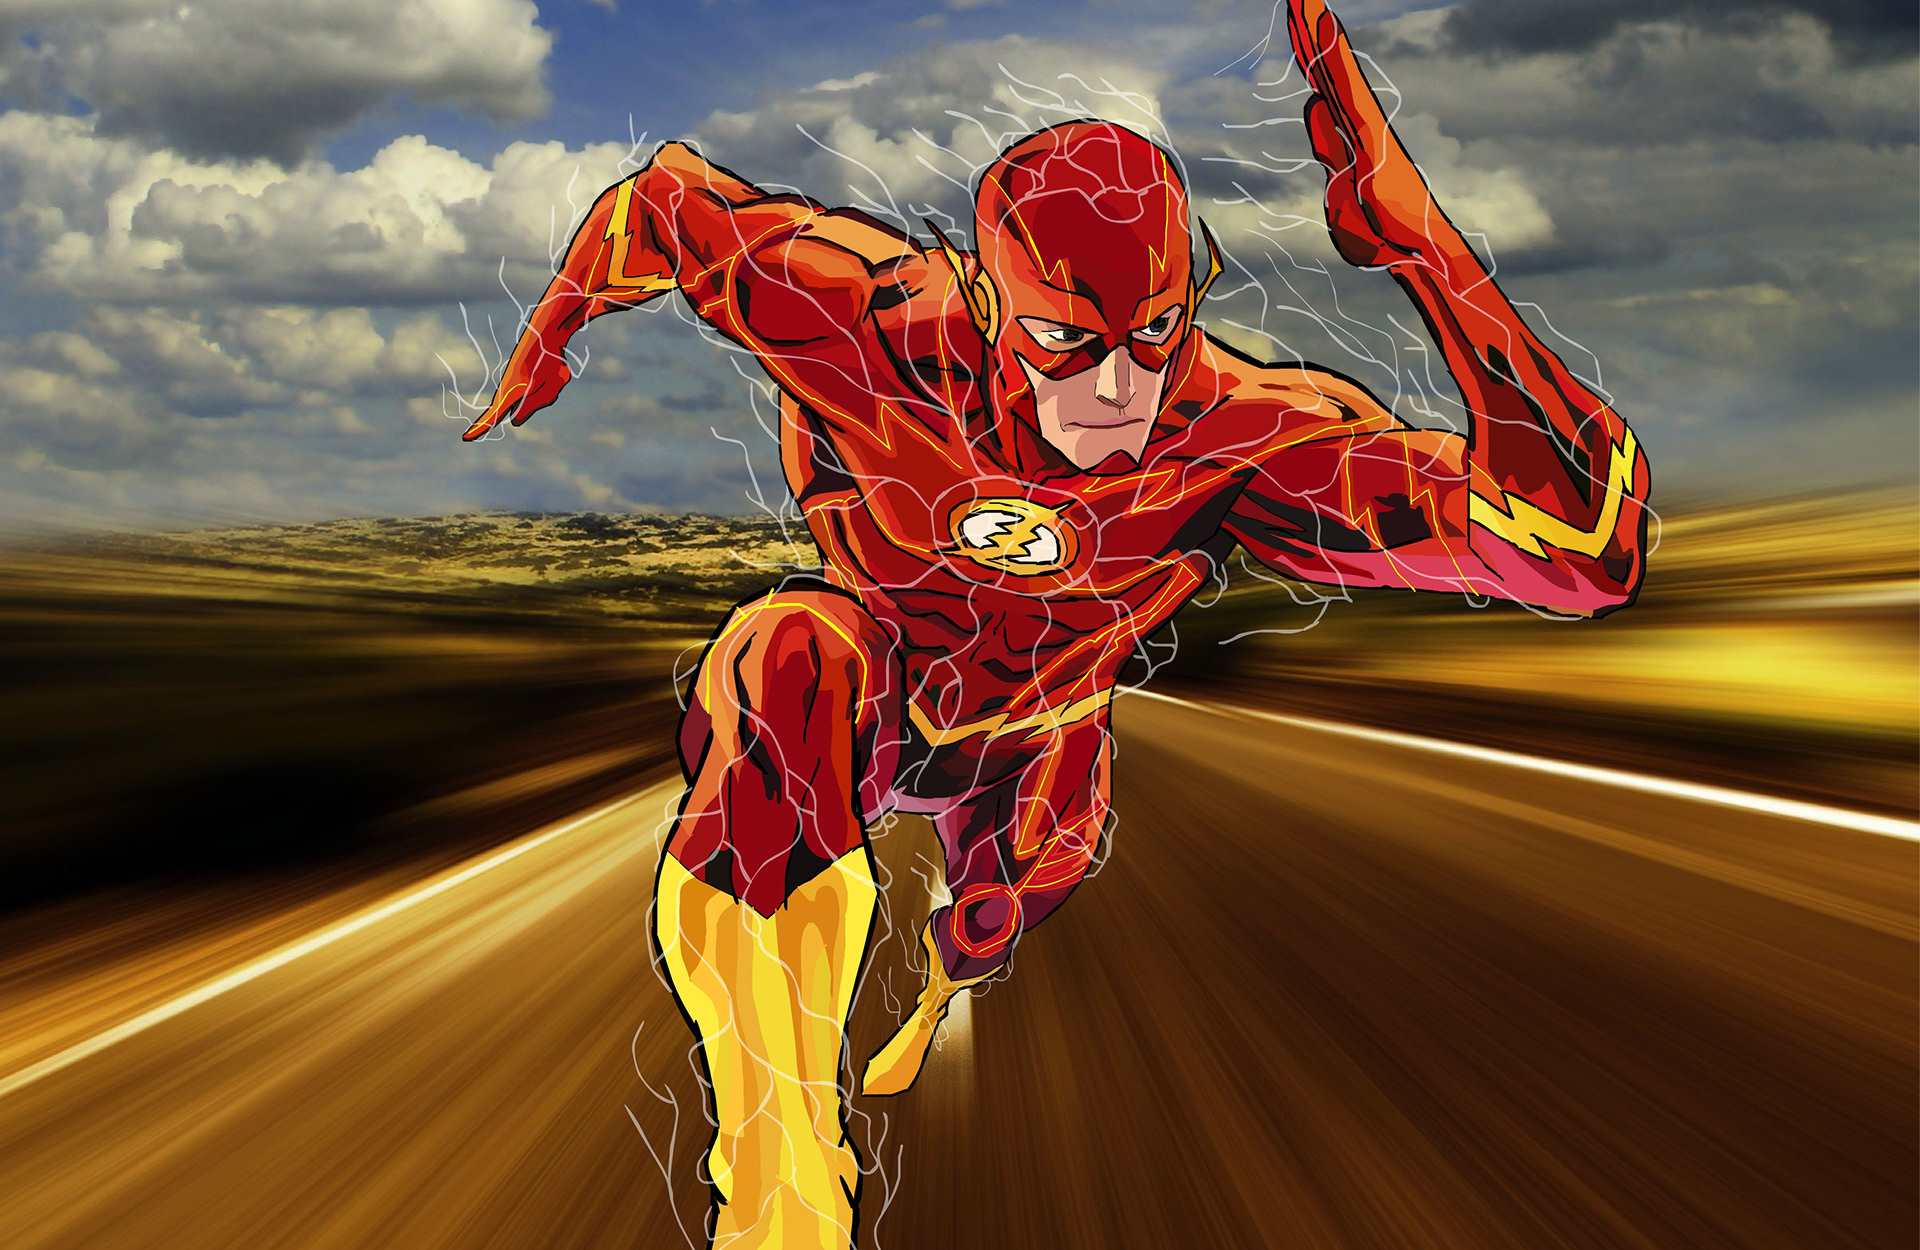 Back before I had a Wacom tablet or a smartphone with a stylus and a 7" screen, I had a mouse and Adobe Flash. So I figured, why not draw THE Flash in Flash. Anyone else remember making Flash games using ActionScript and uploading to NewGrounds?